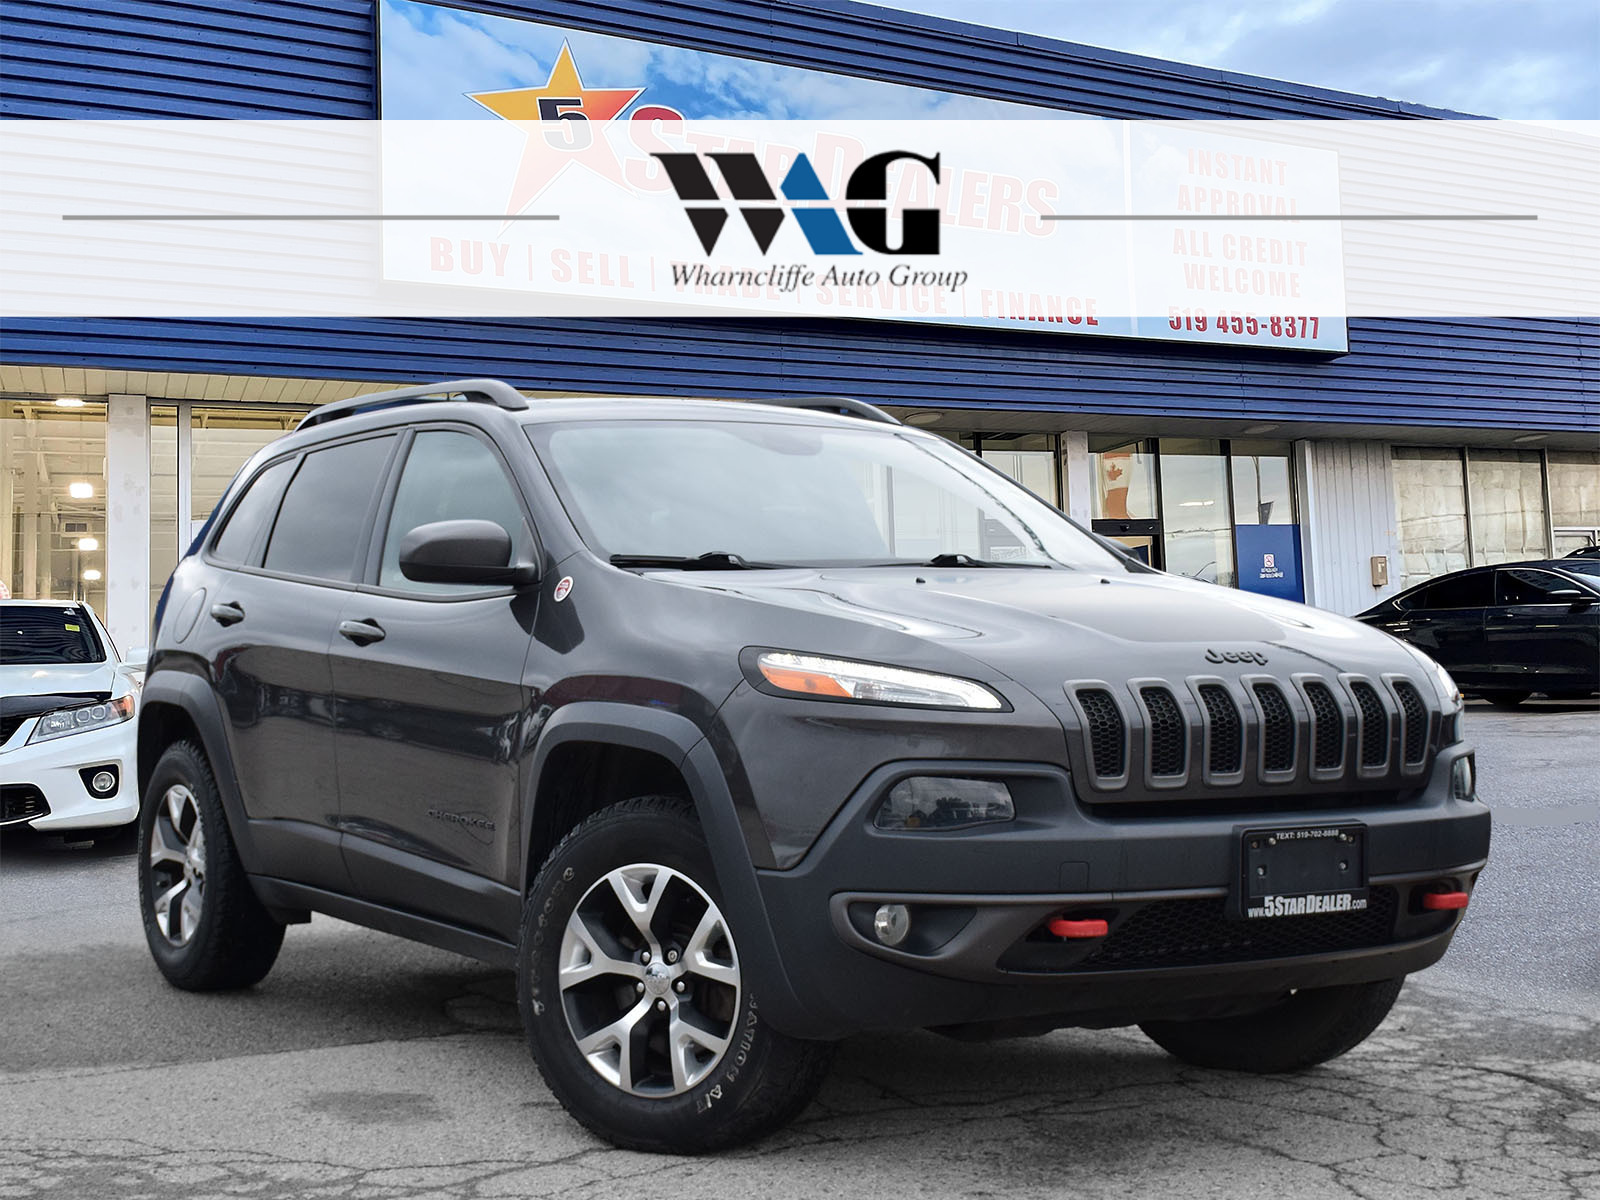 2017 Jeep Cherokee NAV LEATHER PANO ROOF MINT! WE FINANCE ALL CREDIT!